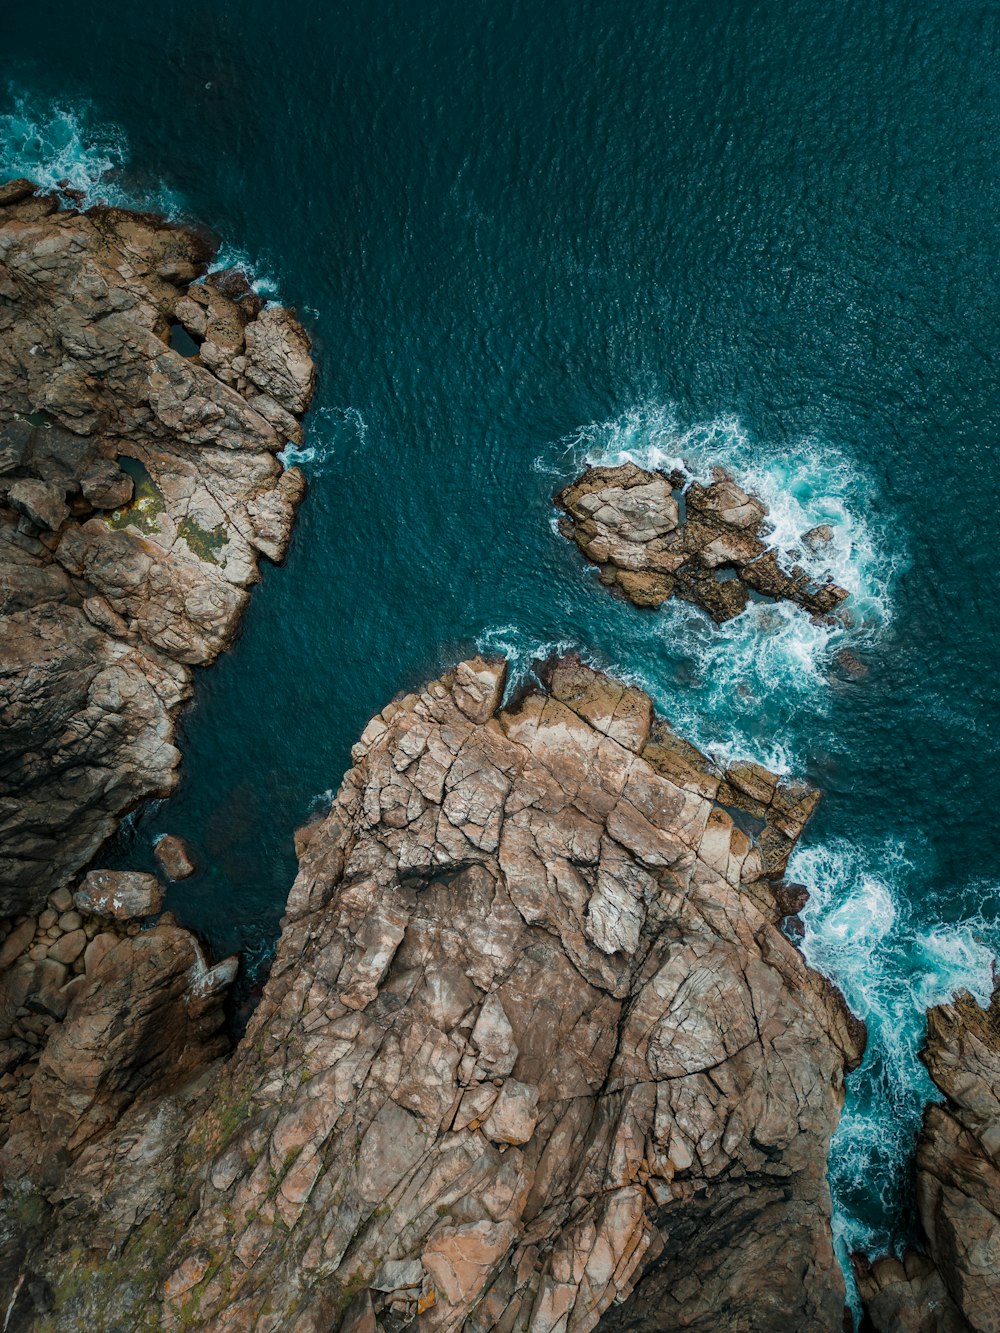 an aerial view of a rocky coastline with blue water